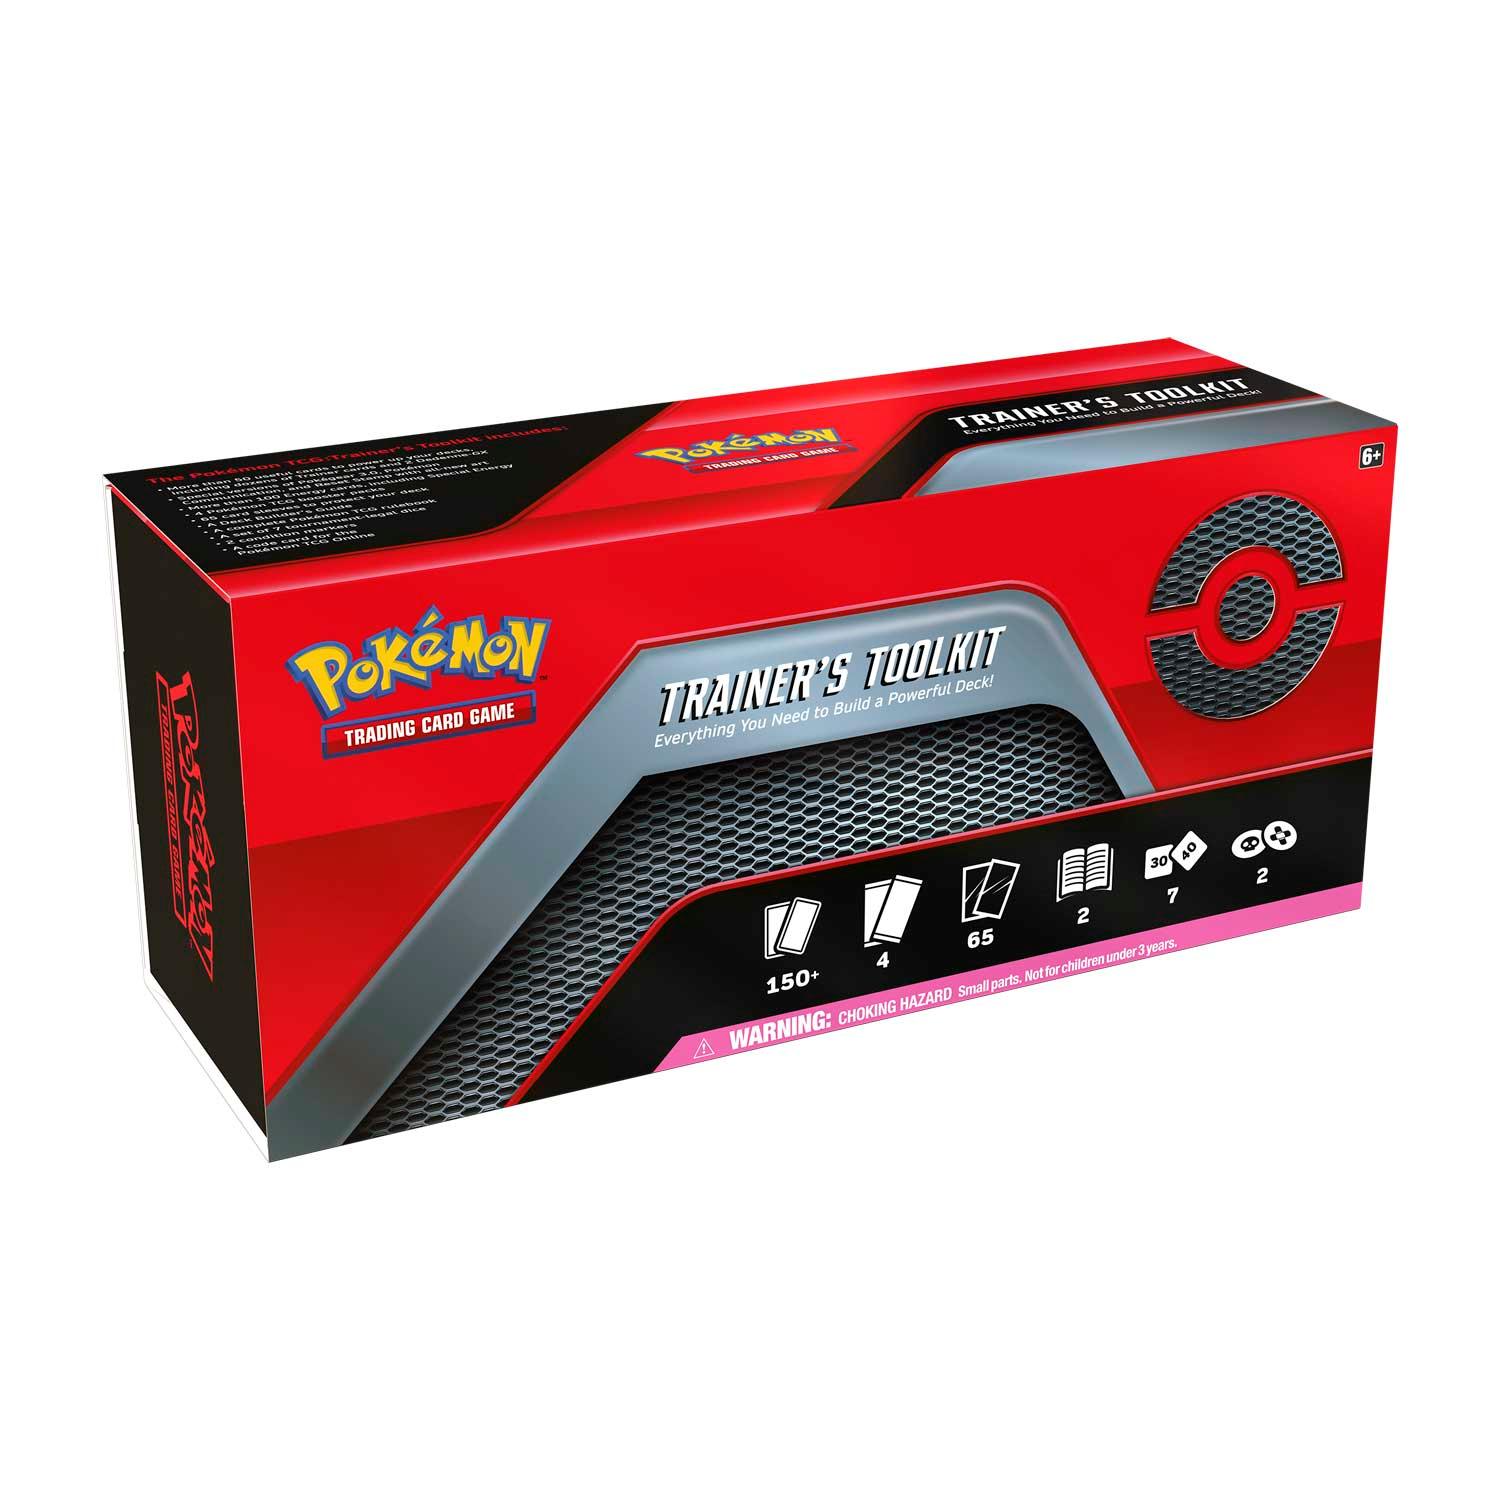 Pokemon Trainer’s Toolkit Box 2020 (Red Color) - Hobby Champion Inc